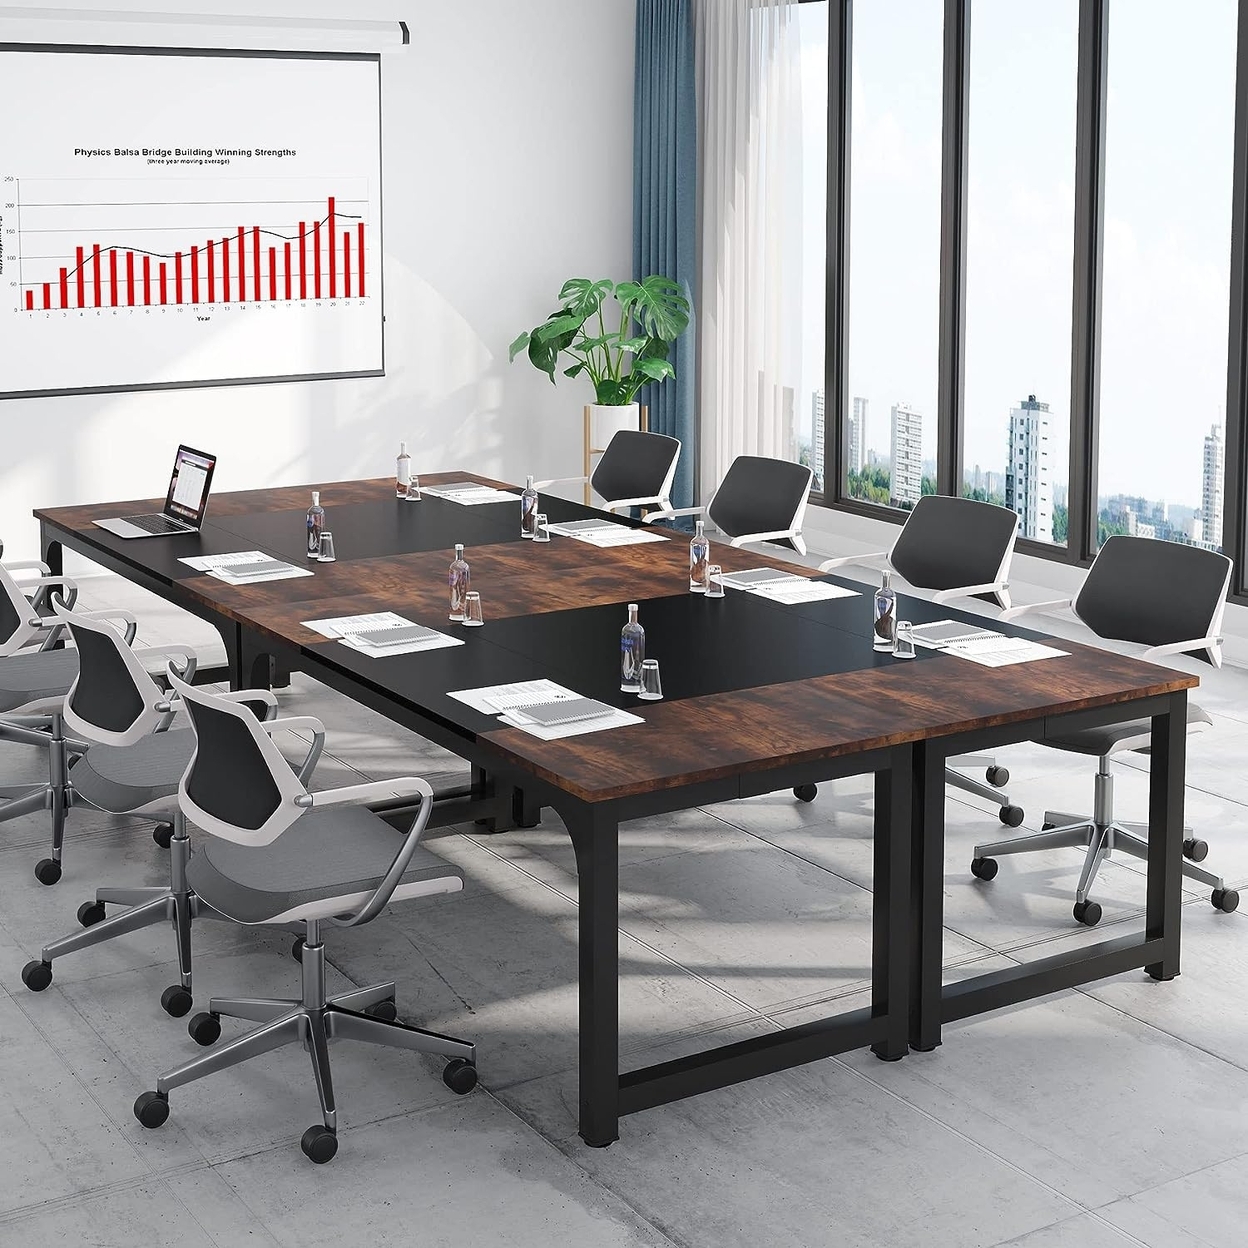 Tribesigns 6FT Conference Table, 70.8 W X 31.5 D Meeting Room Table Boardroom Desk For Office Conference Room - Rustic Brown